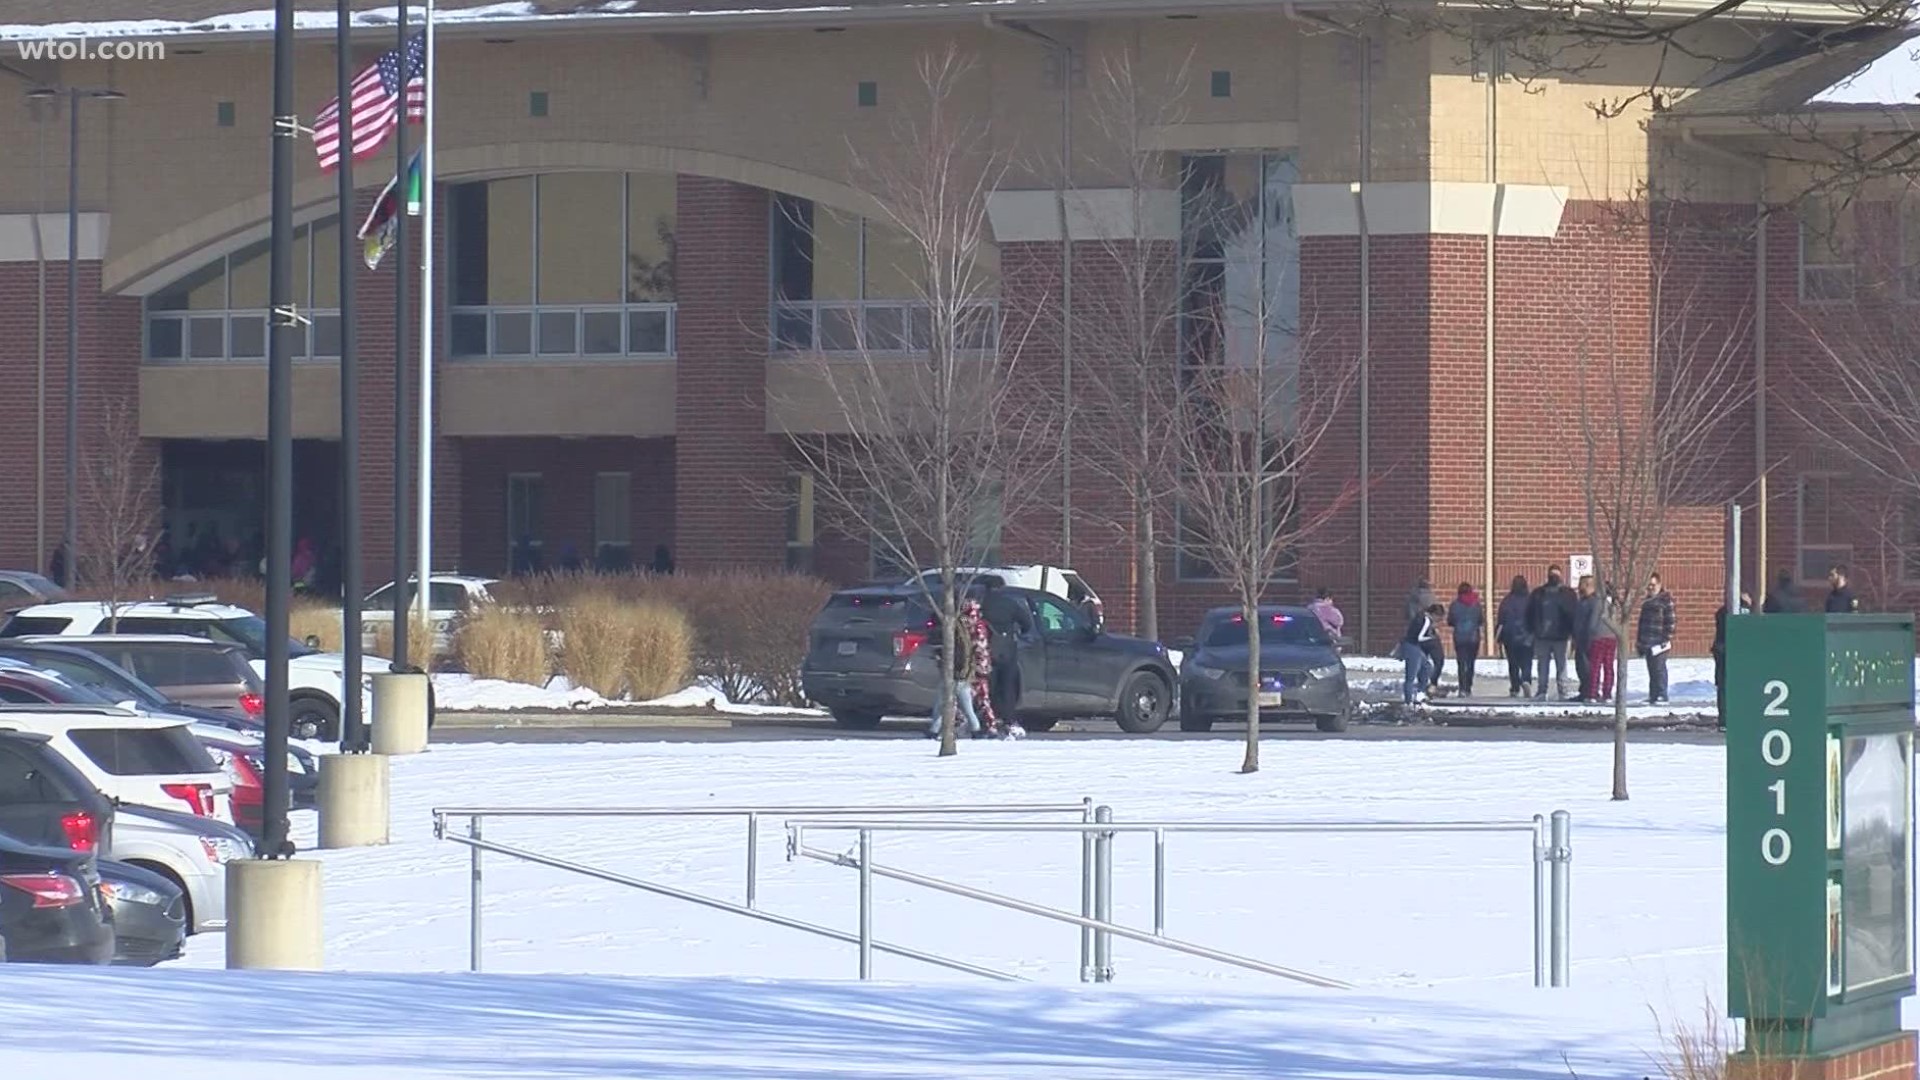 Both Start High School and Longfellow Elementary School went on a brief lockdown Monday as police searched the area.